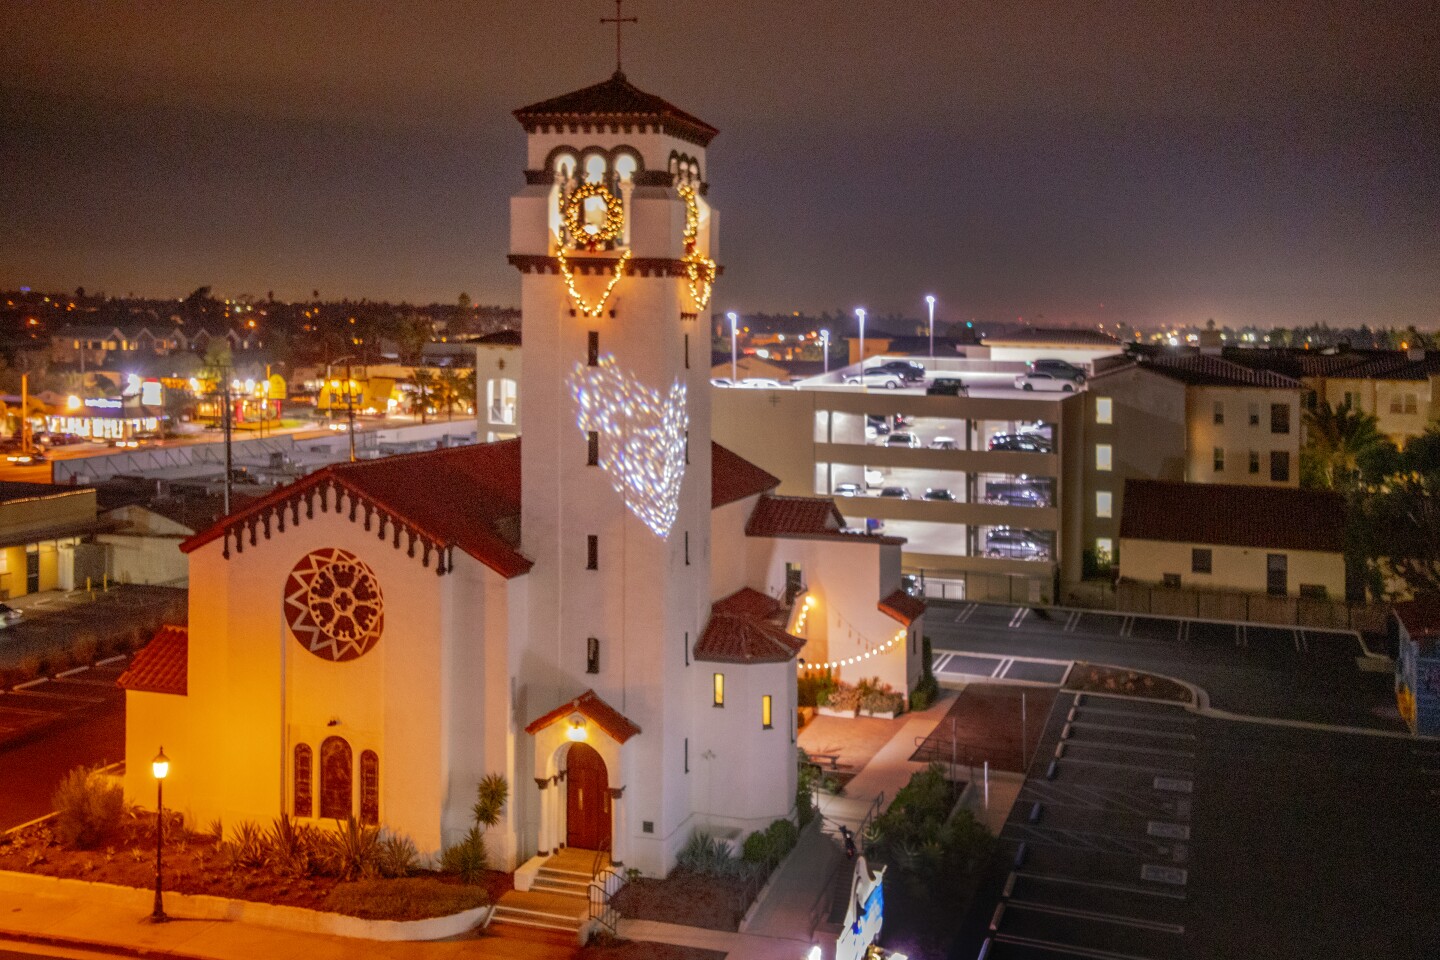 Christmas lights shine from the 92-year-old bell tower of the First United Methodist Church. (Photo by Spencer Grant)